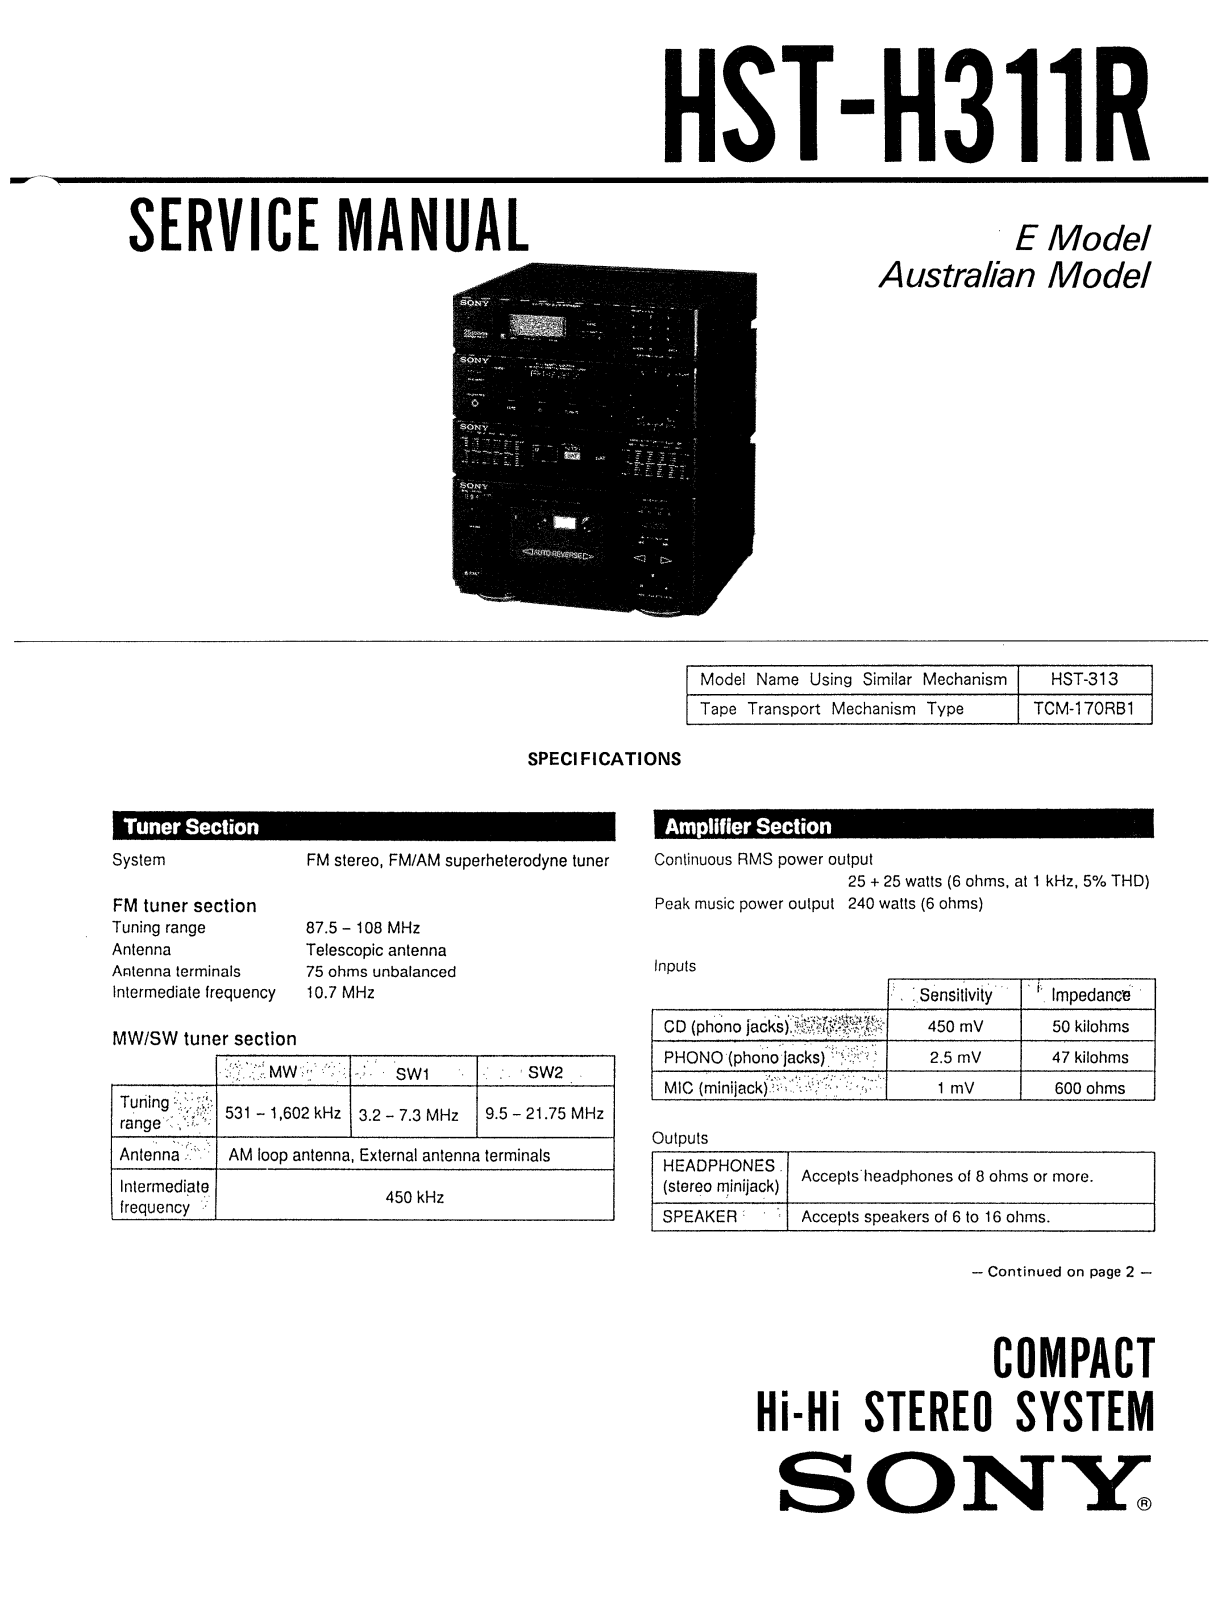 Sony HSTH-311-R Service manual